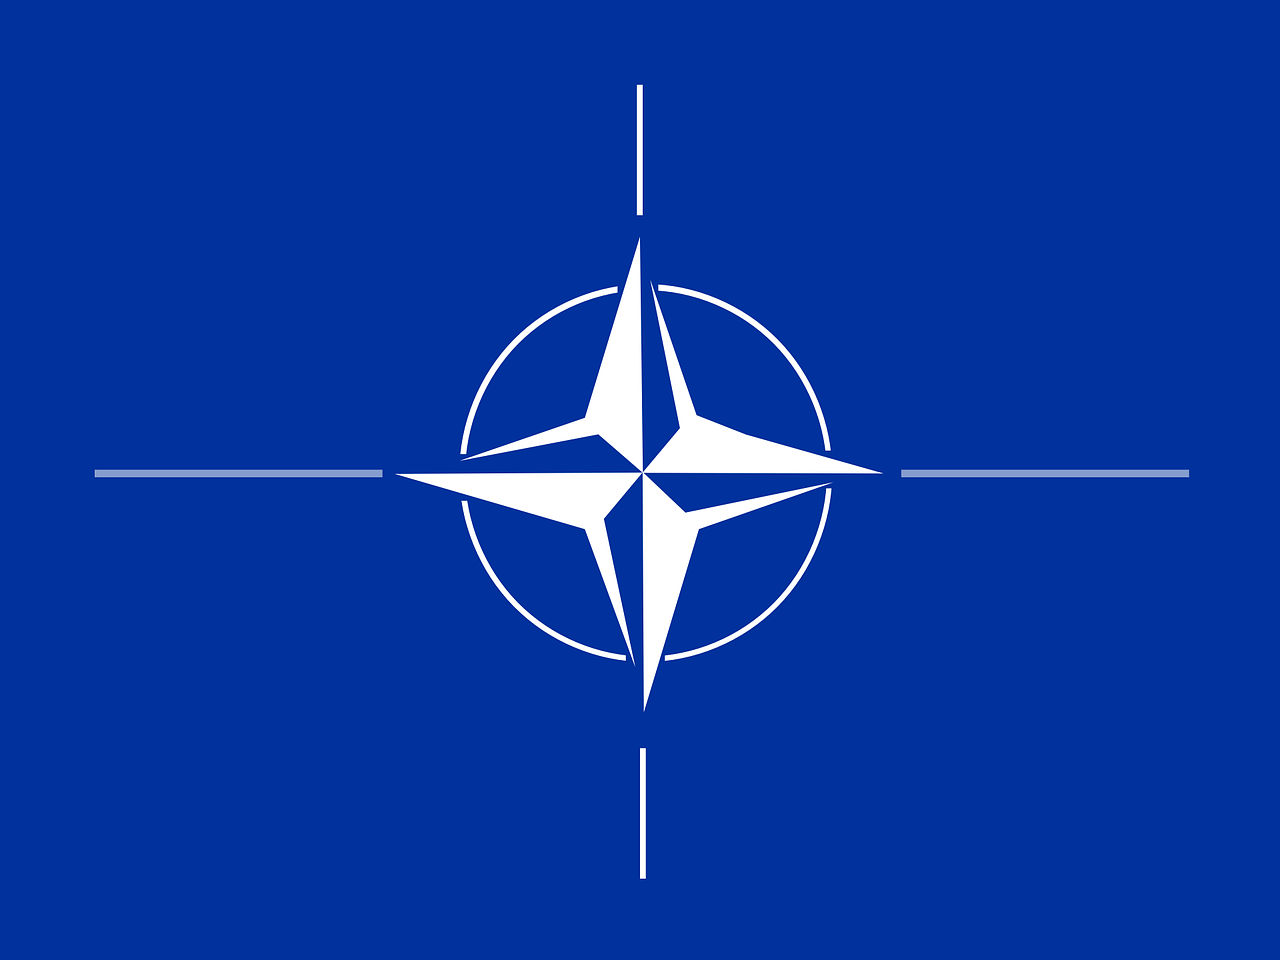 Sweden formally announces intention to join NATO after Finland bid